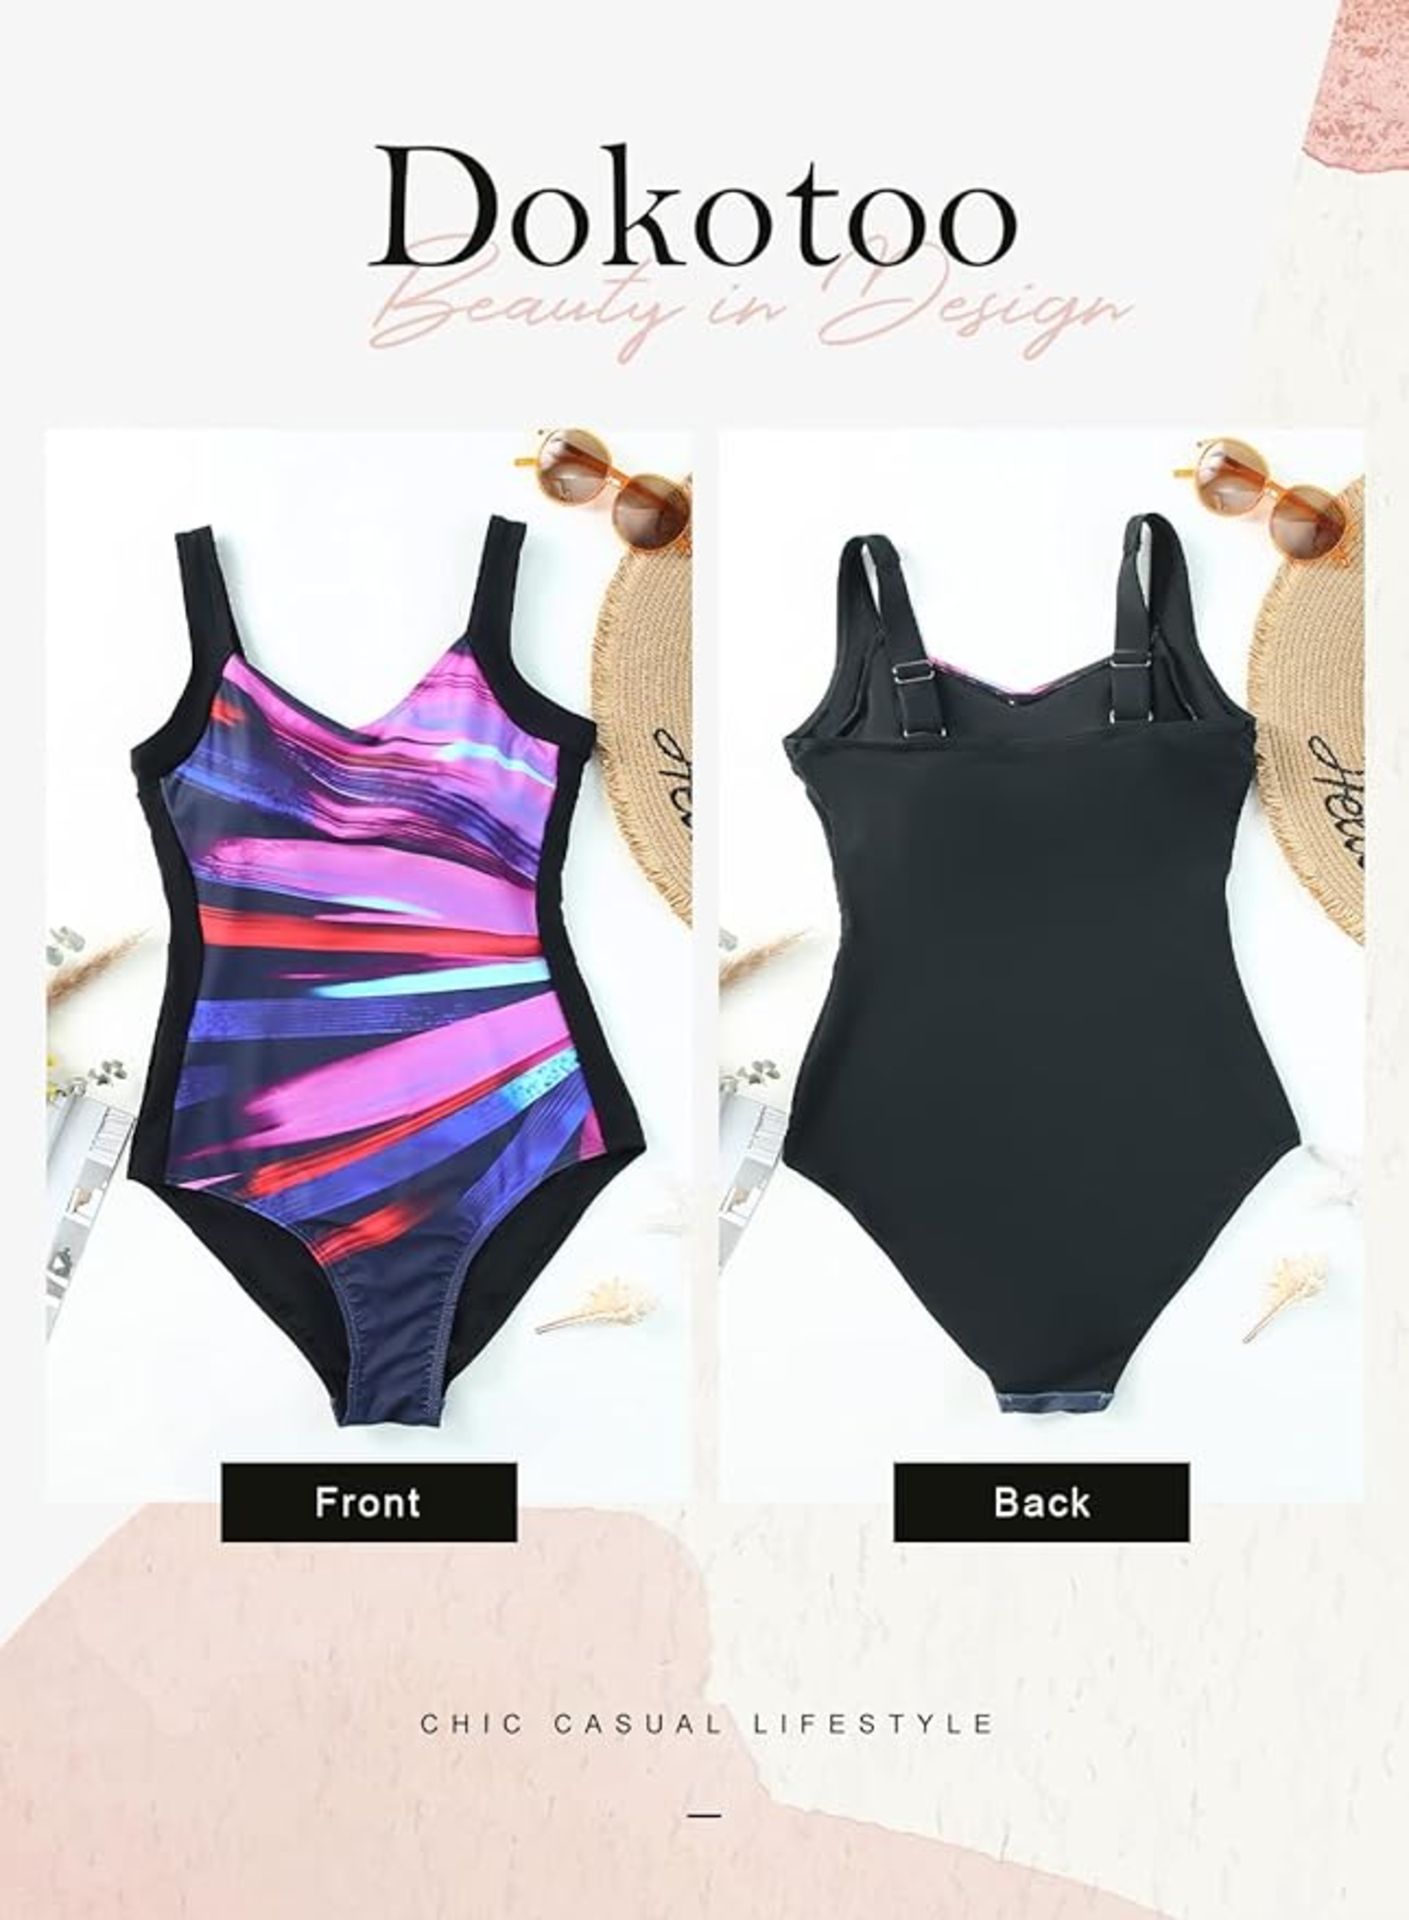 Approx RRP £500, Collection of Dokotoo Women's Swimming Costumes, 20 Pieces - Image 2 of 3